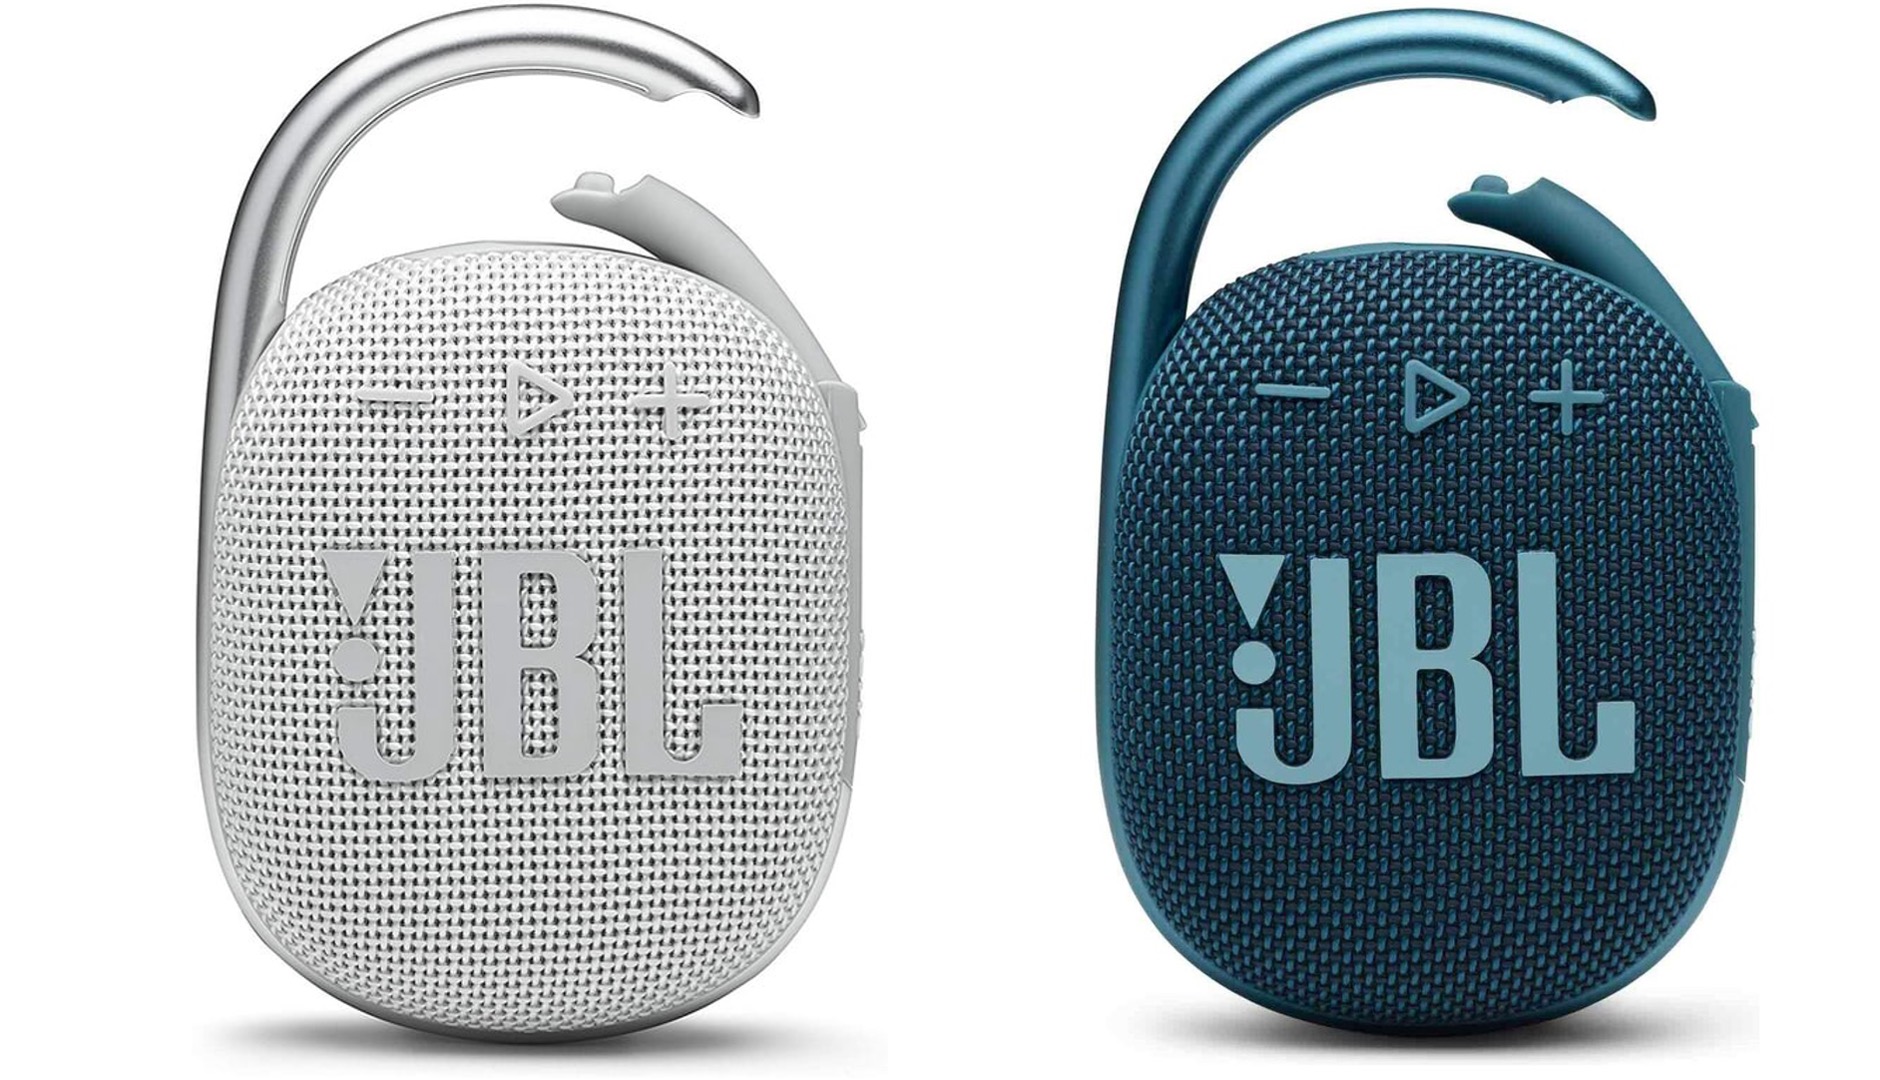 The JBL Clip 5 is expected to retain its signature carabiner clip with IP67 waterproof resistance